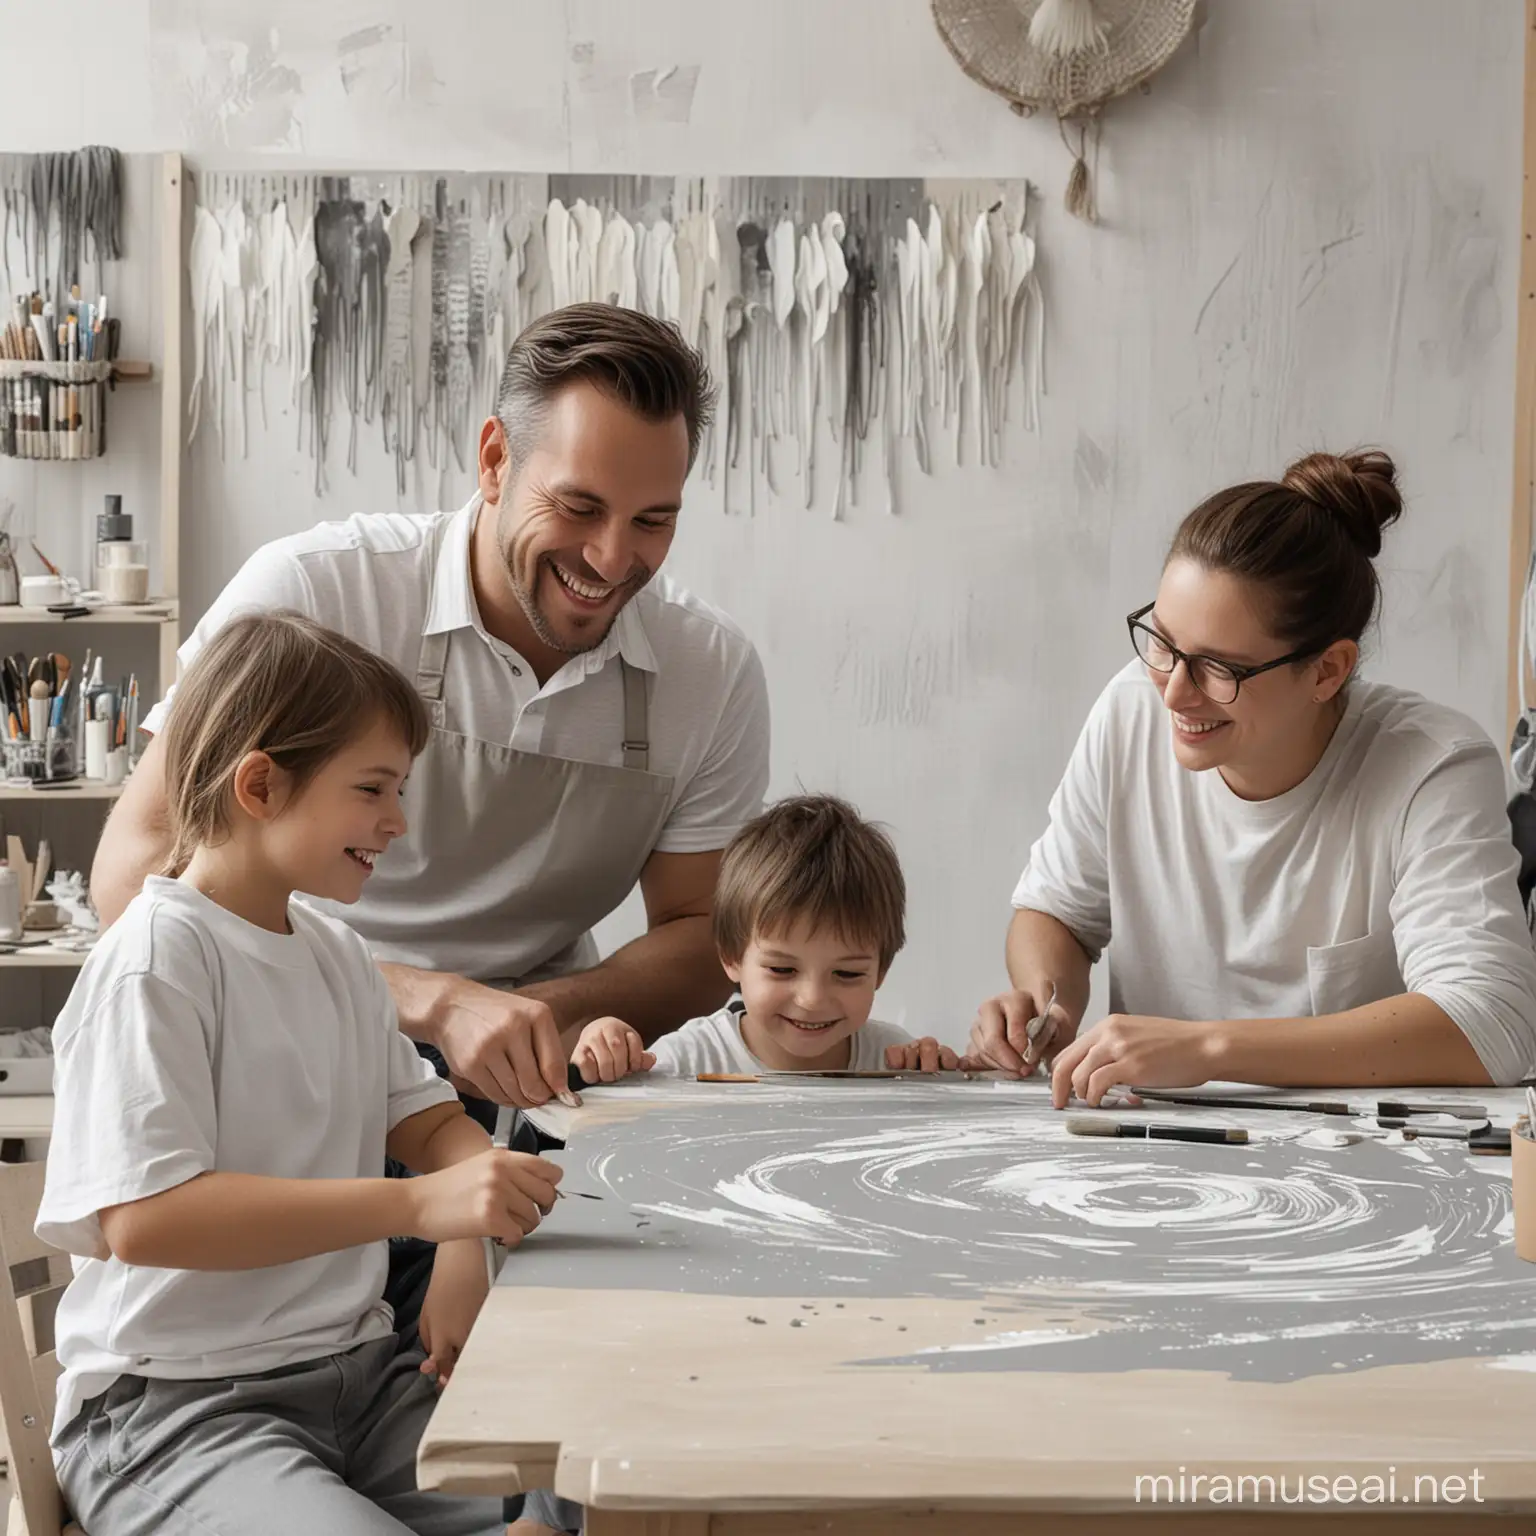 Family Artistry Painting Together in a Contemporary Workshop